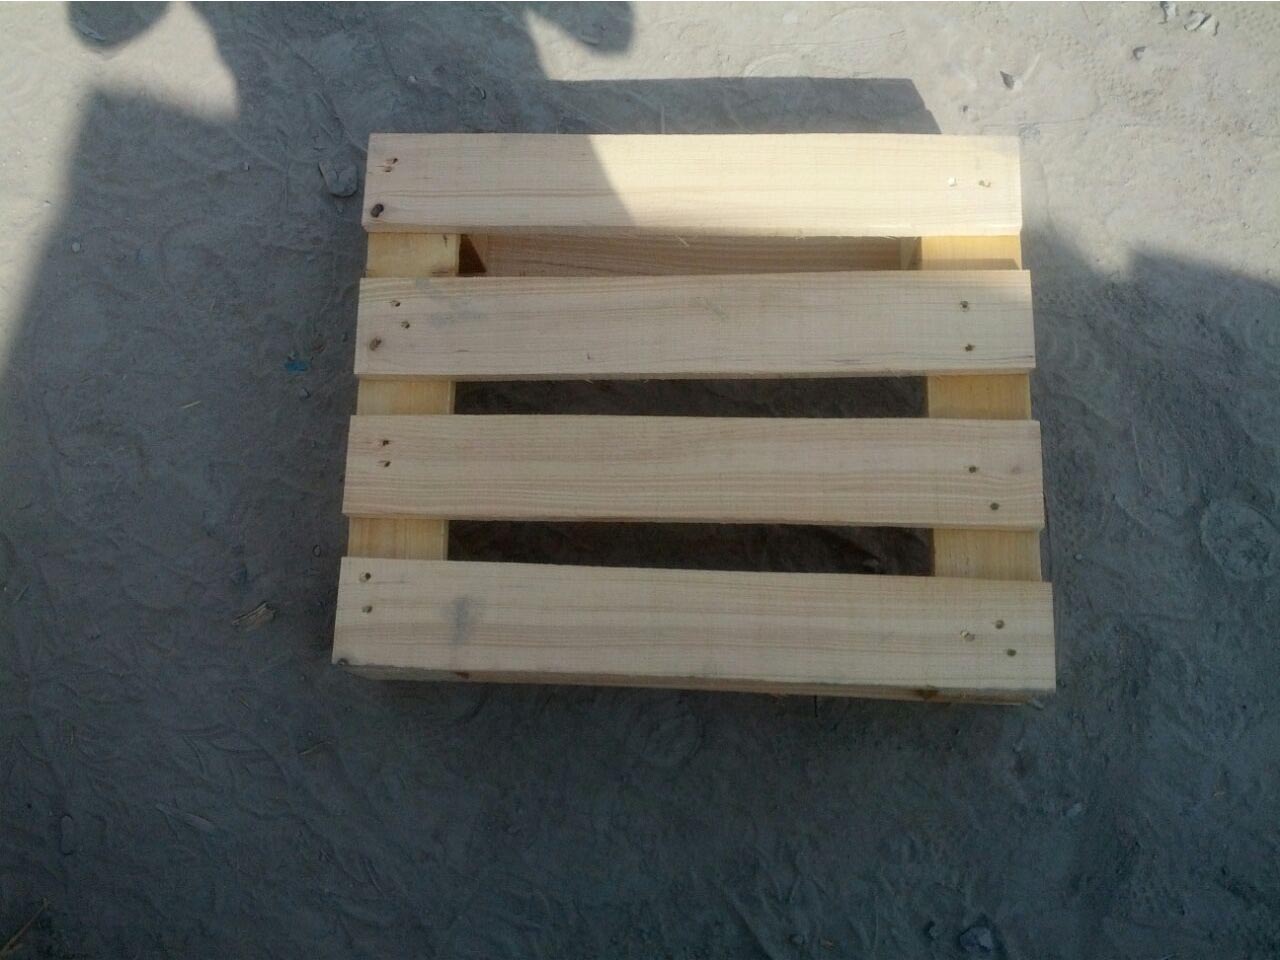 wooden pallet on the floor in shade